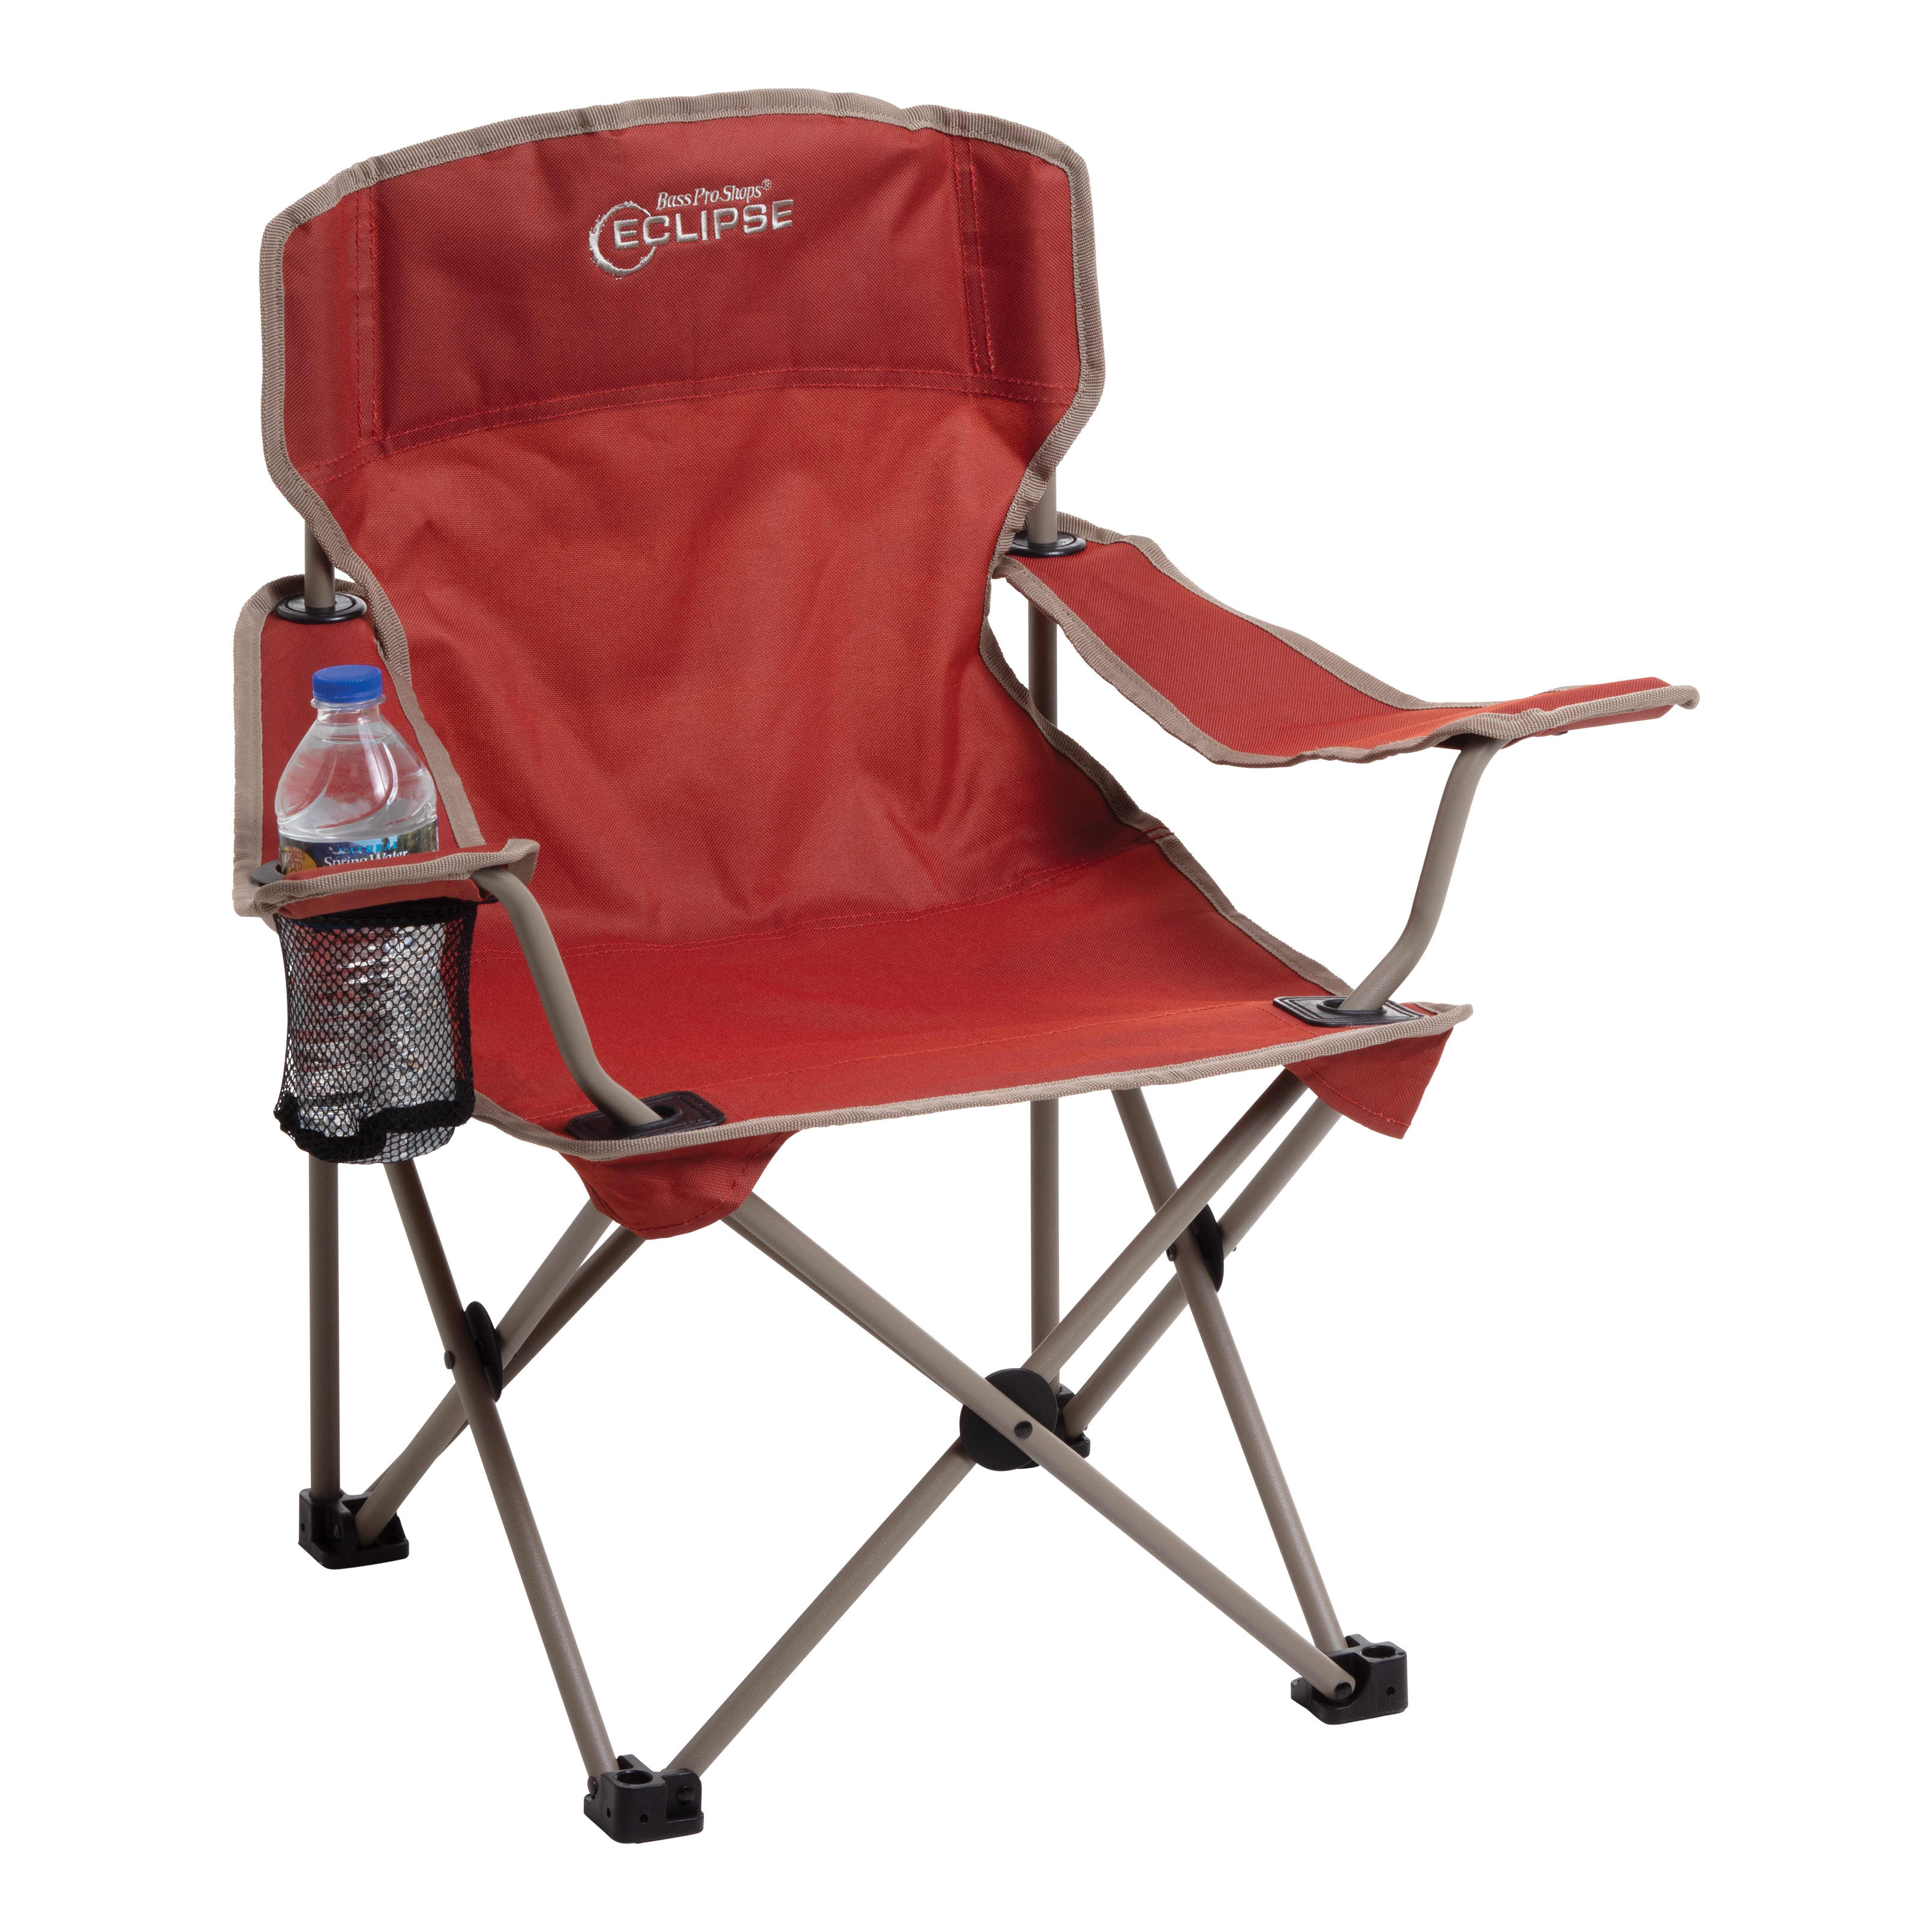 Bass Pro Shops® Eclipse Camp Chair for Kids